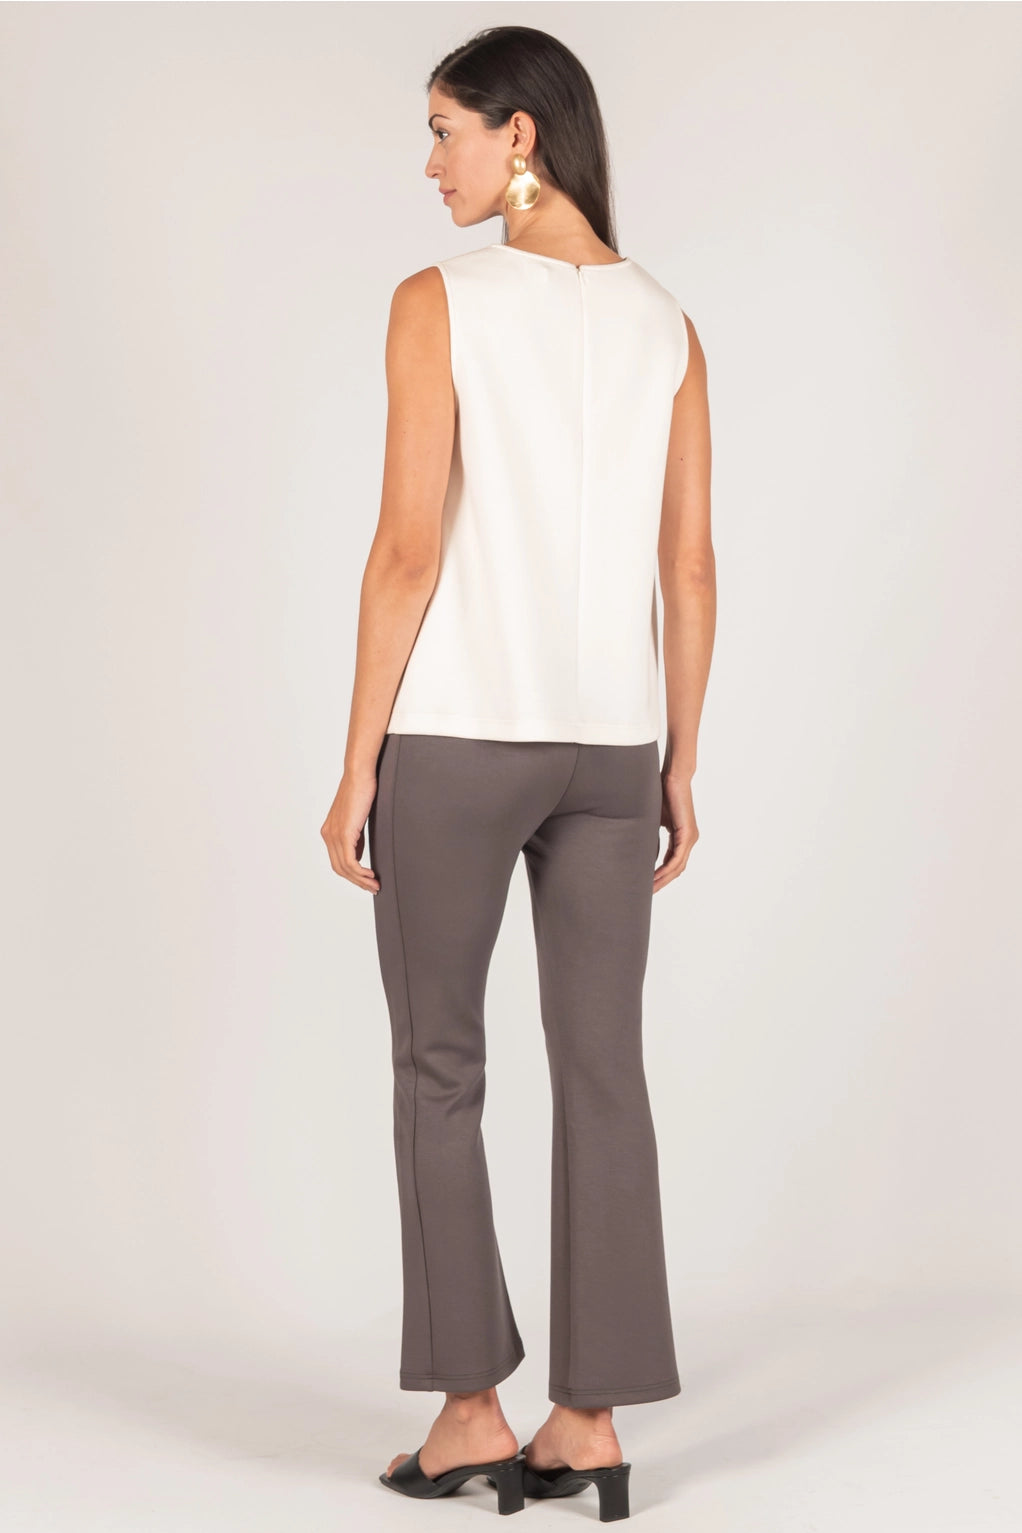 Butter Modal Fitted Flare Pants- Two Colors